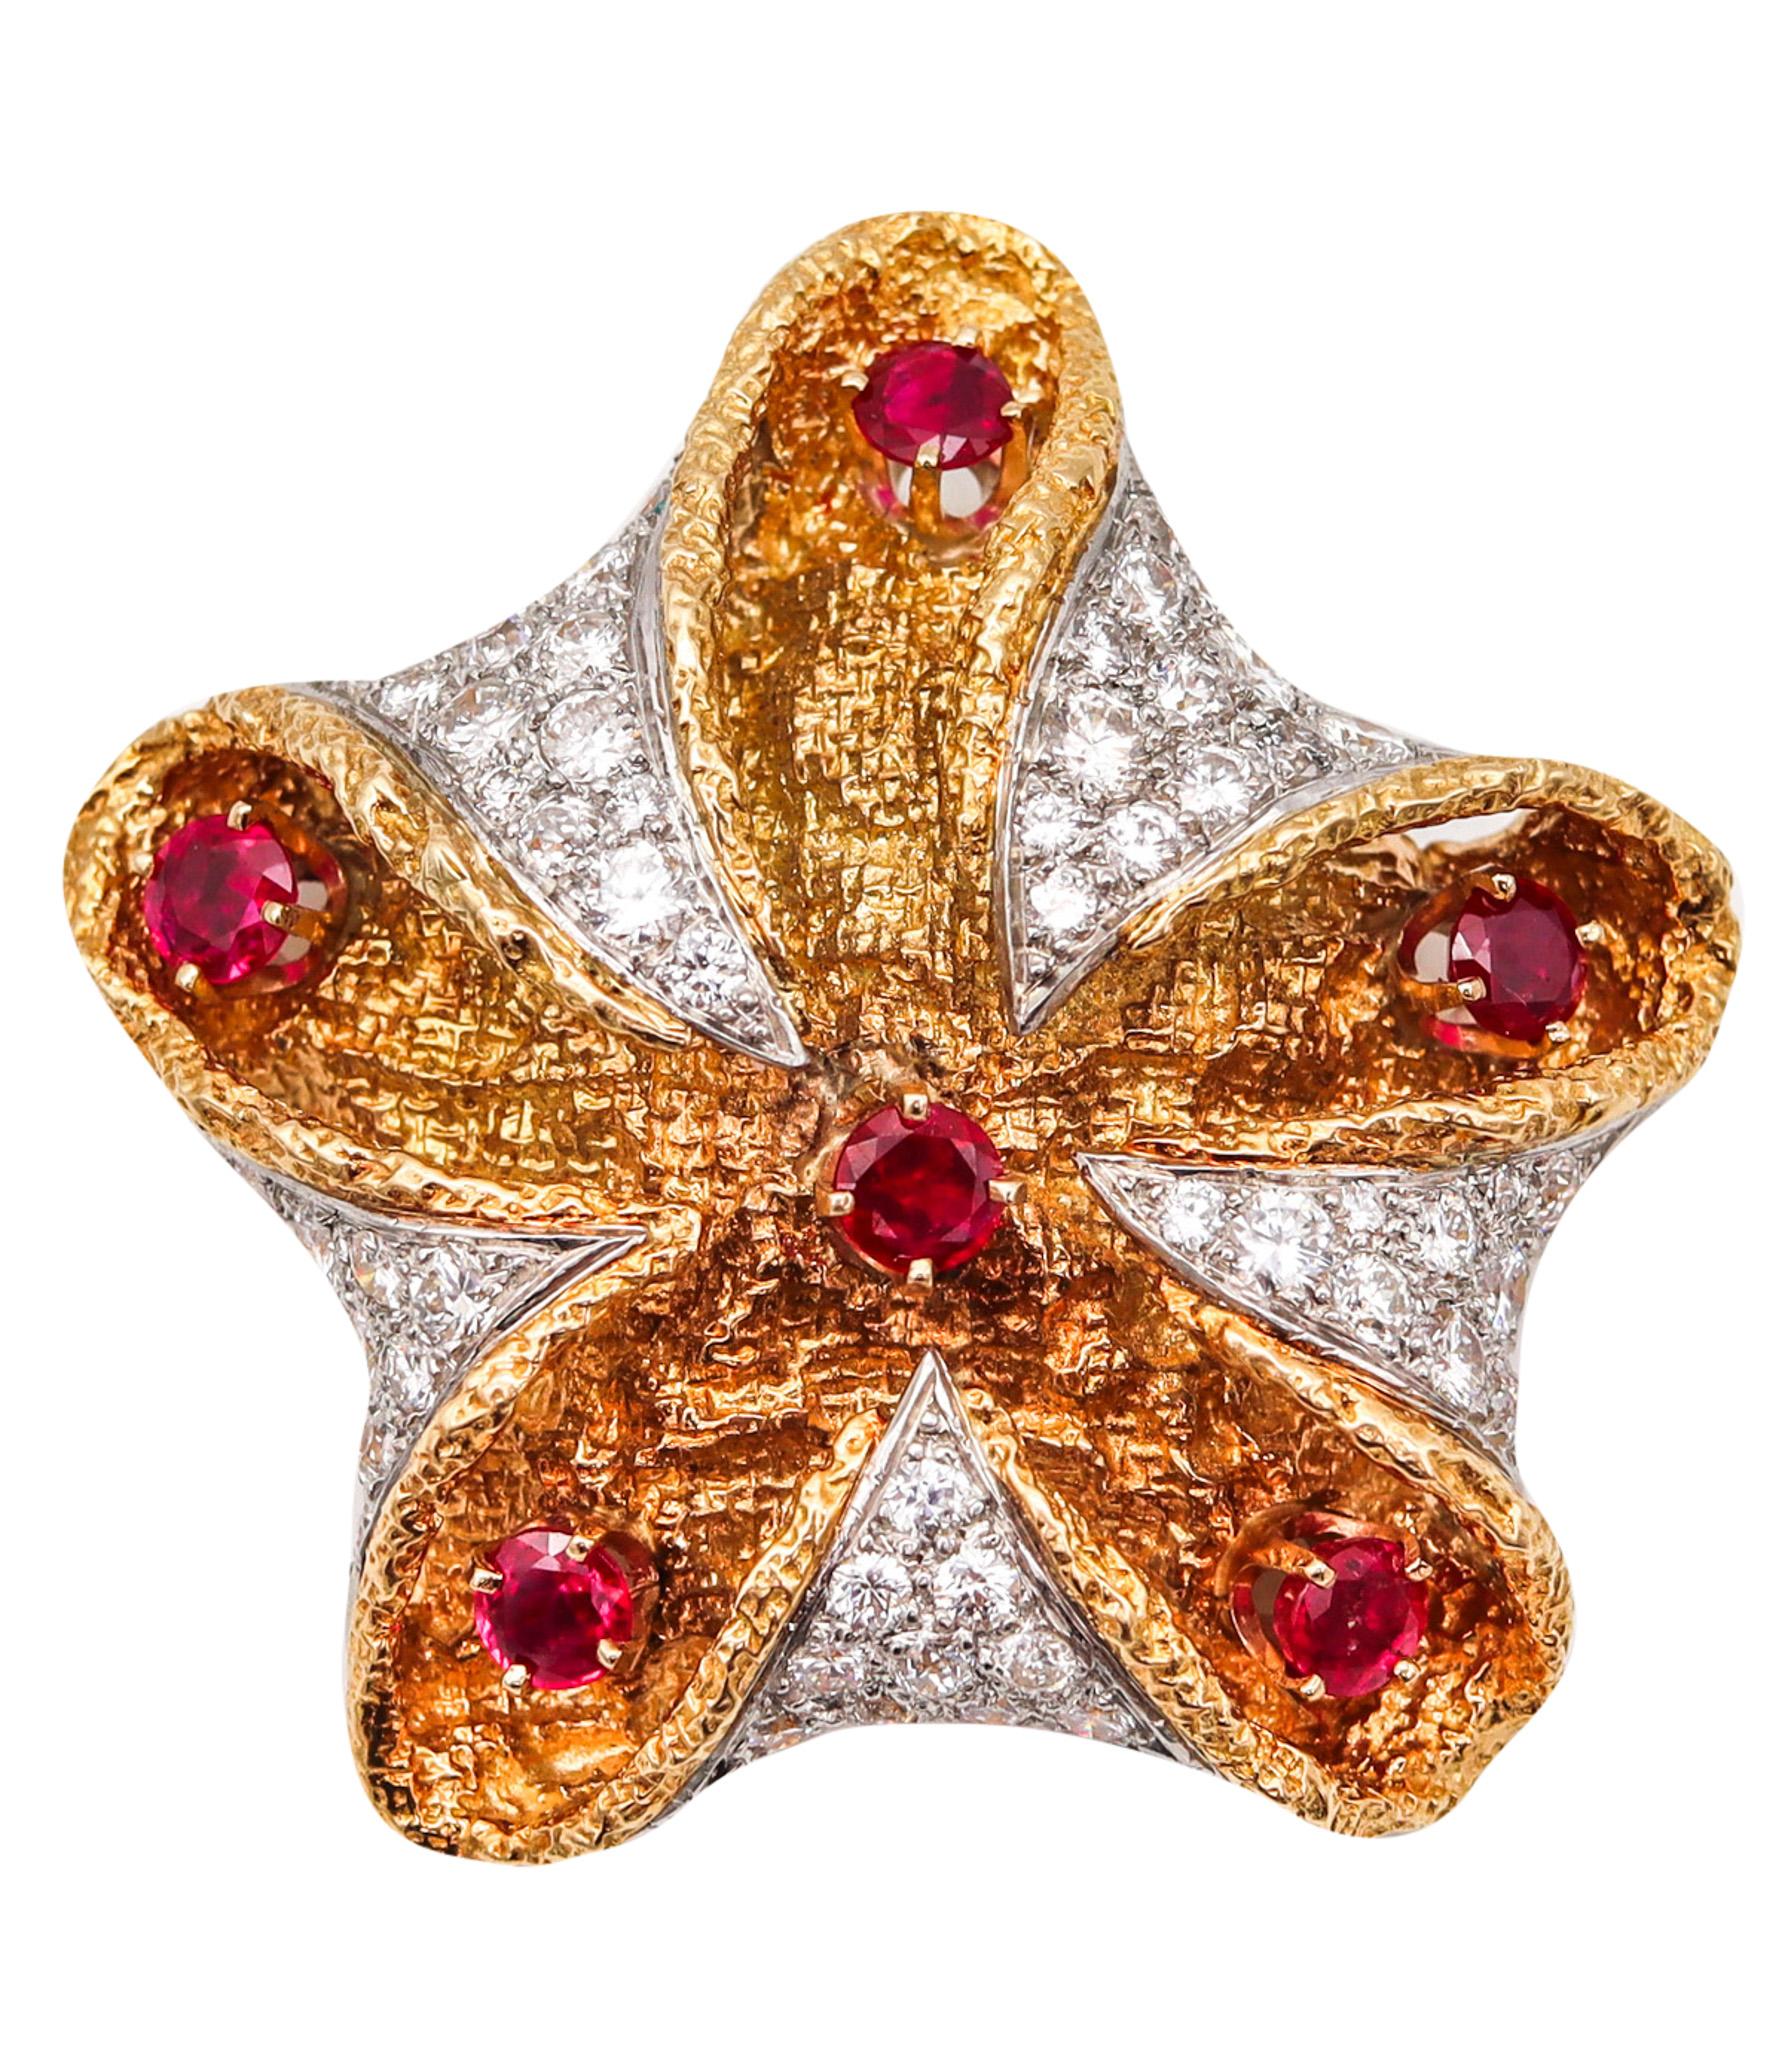 A starfish pendant brooch made in France.

Gorgeous piece of high jewelry, created in Paris France, back in the 1960. This convertible pendant-brooch has been designed in the shape of a stylized starfish of five-points embellished with diamonds and